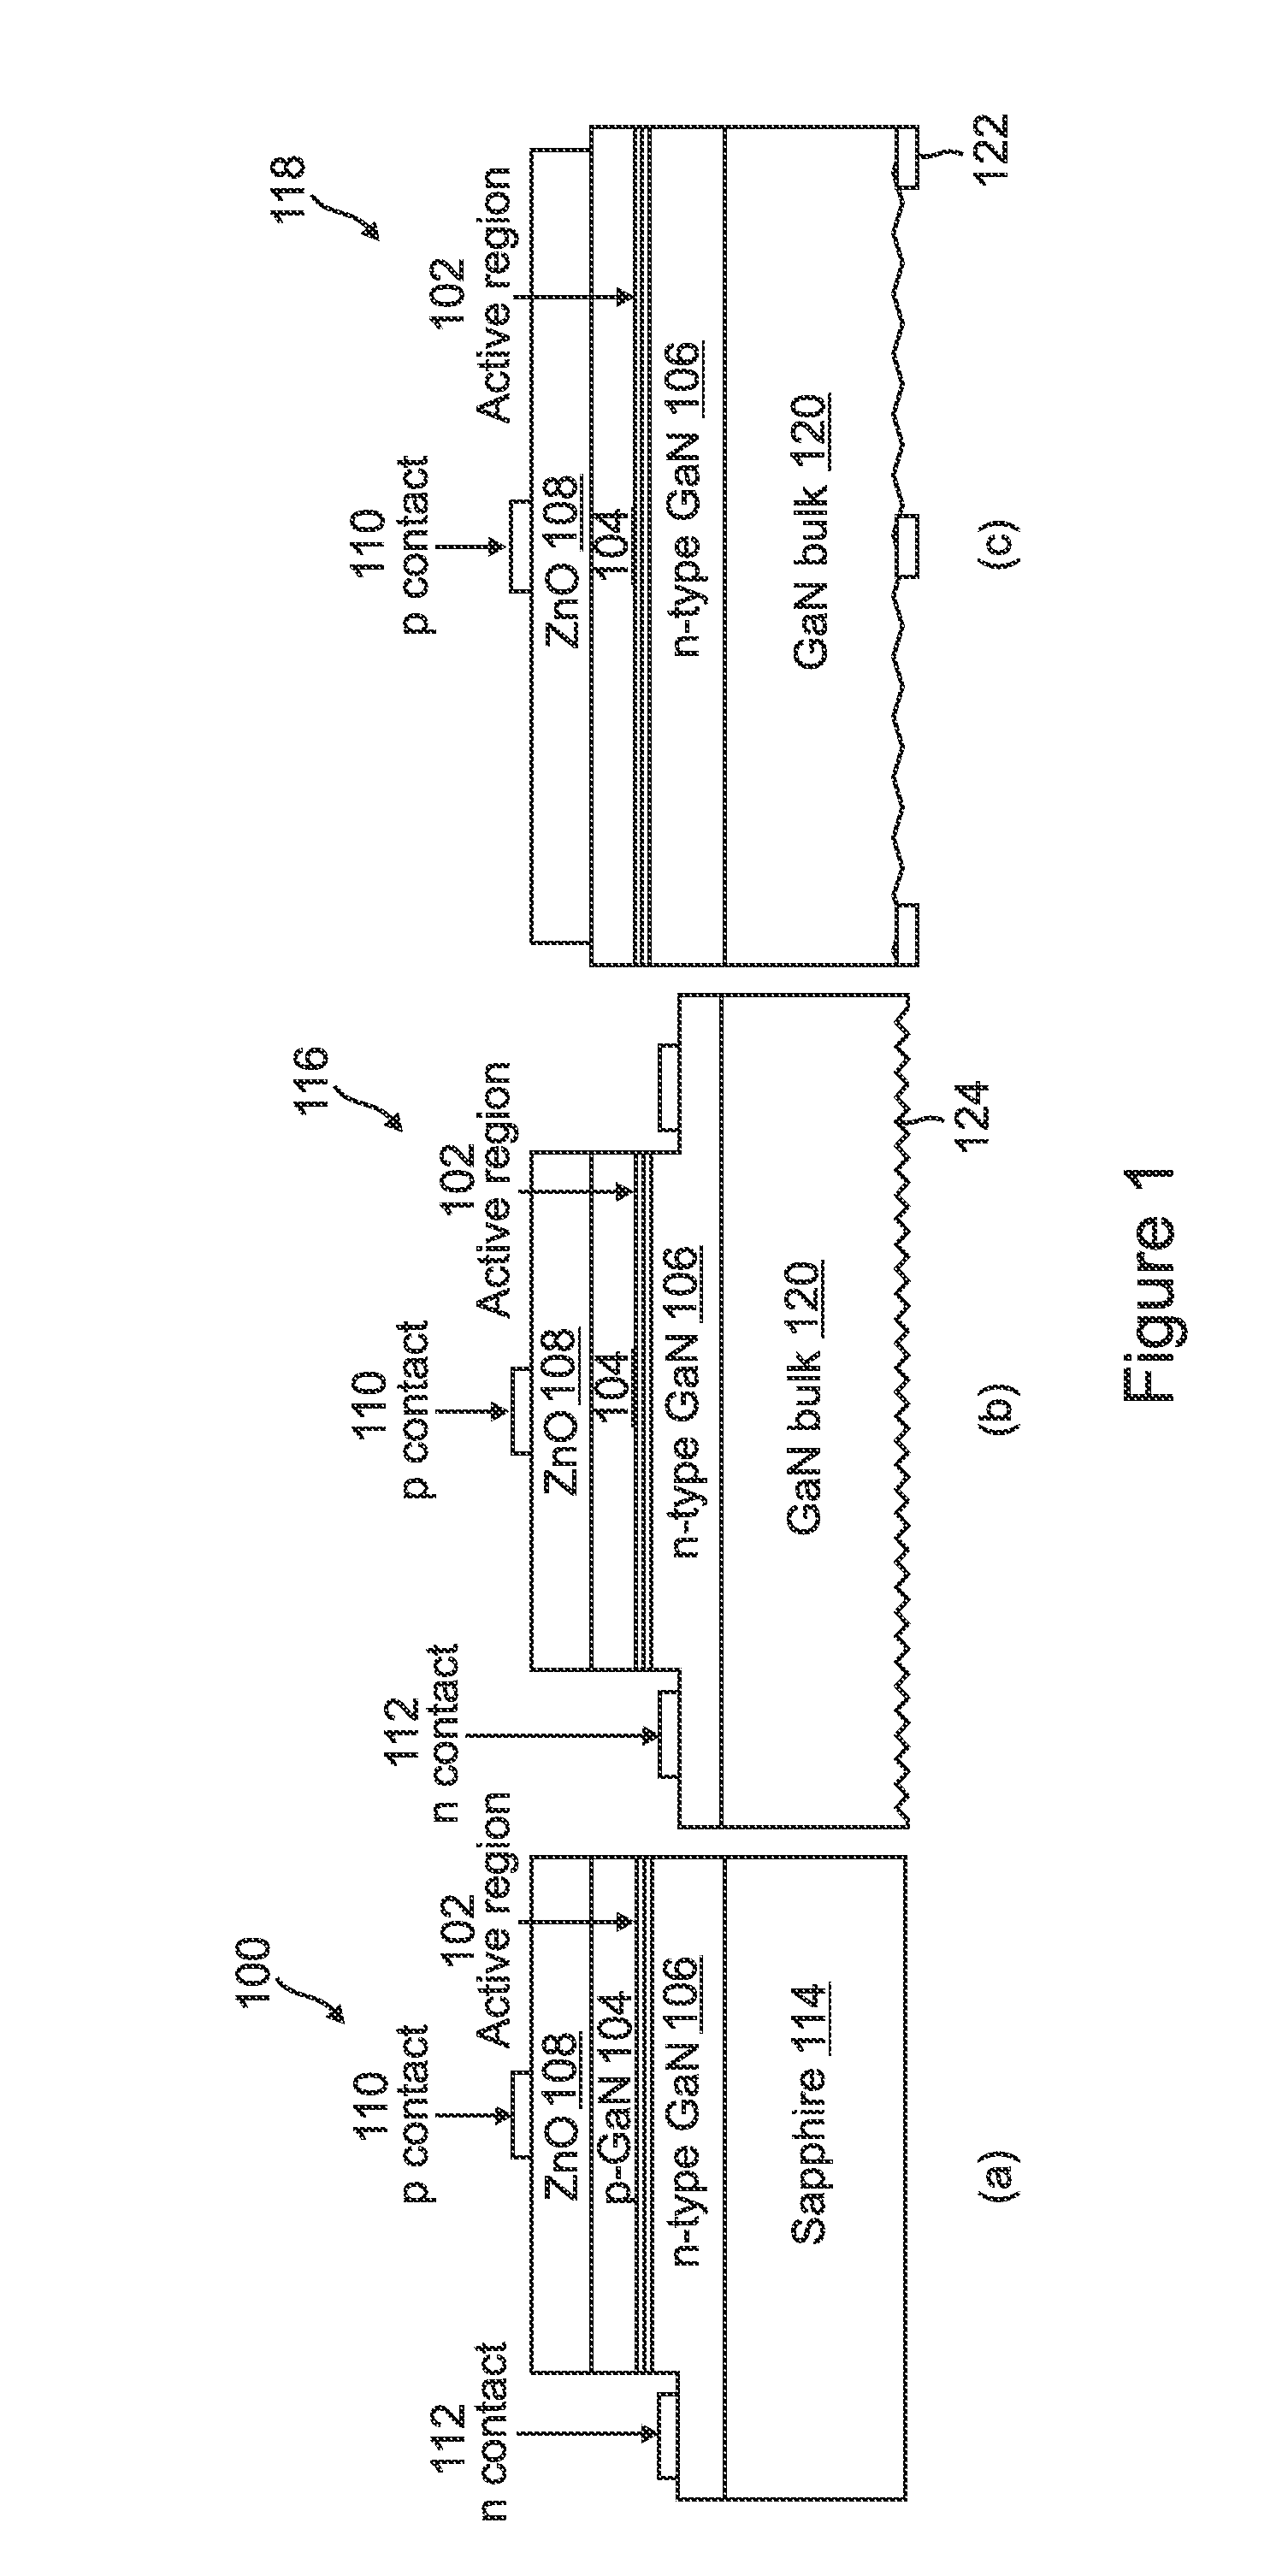 Light emitting diodes with zinc oxide current spreading and light extraction layers deposited from low temperature aqueous solution